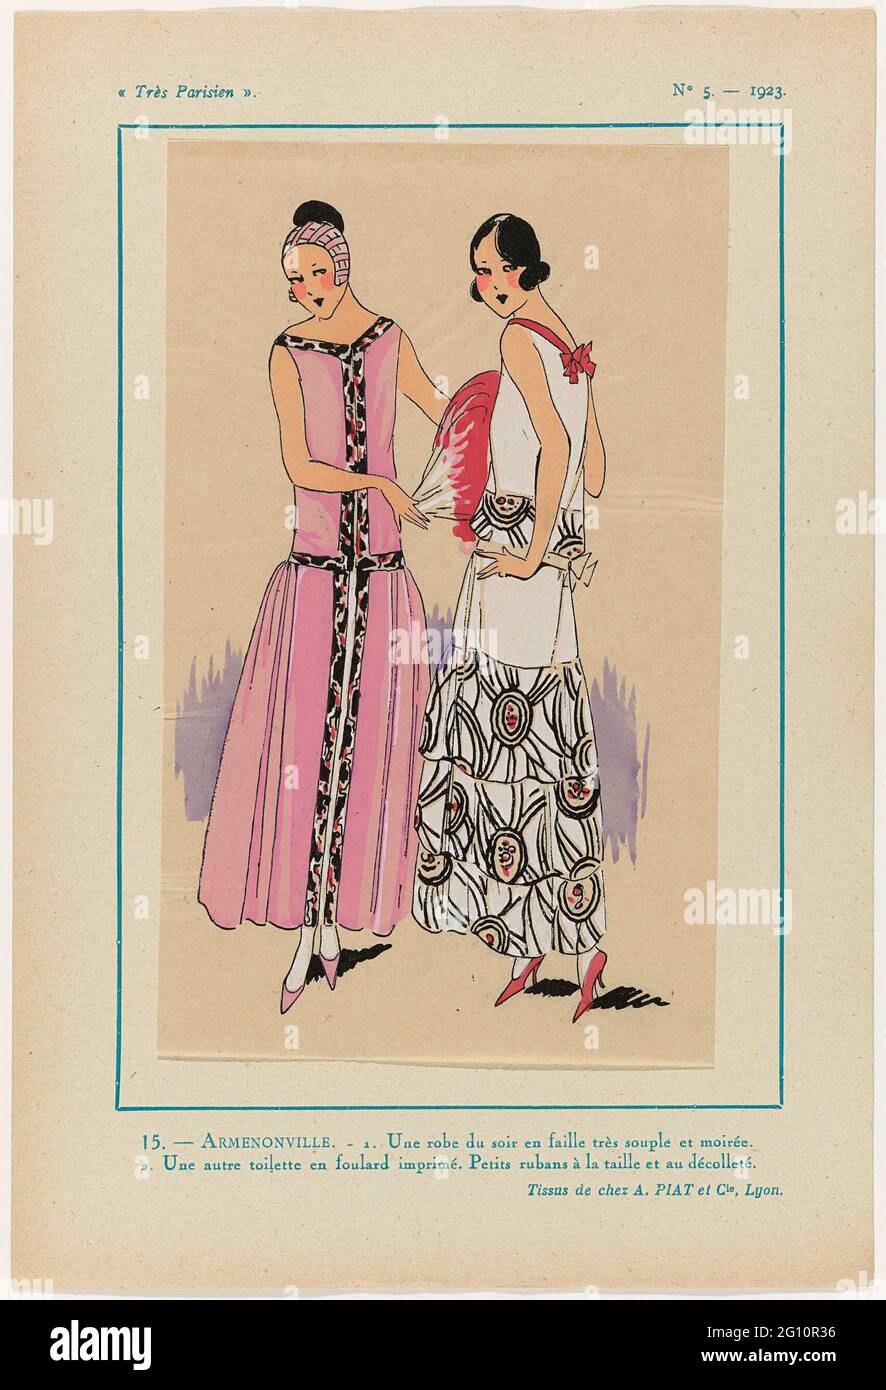 Très Parisien, 1923, No 5: 15.- Armenonville. - 1. Une Robe du Soir .... 1.  An evening dress by flexible 'faille' and moiré (silk?). 2. Another  'Toilette' of Printed Foulard. Small ribbons